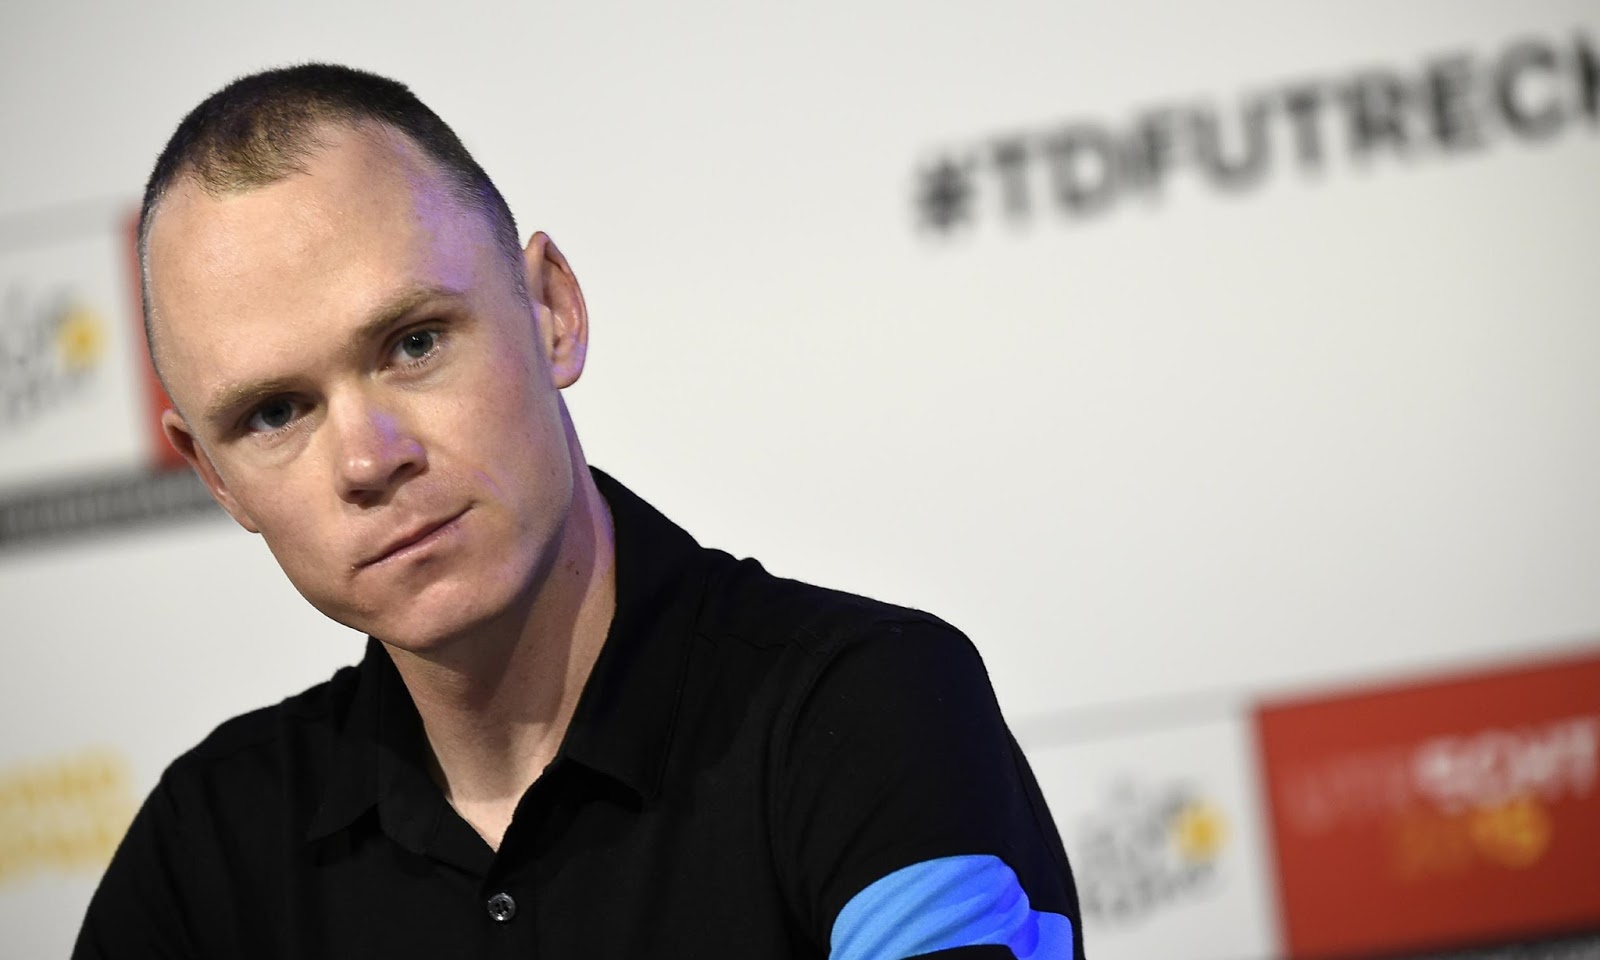 CHRIS FROOME